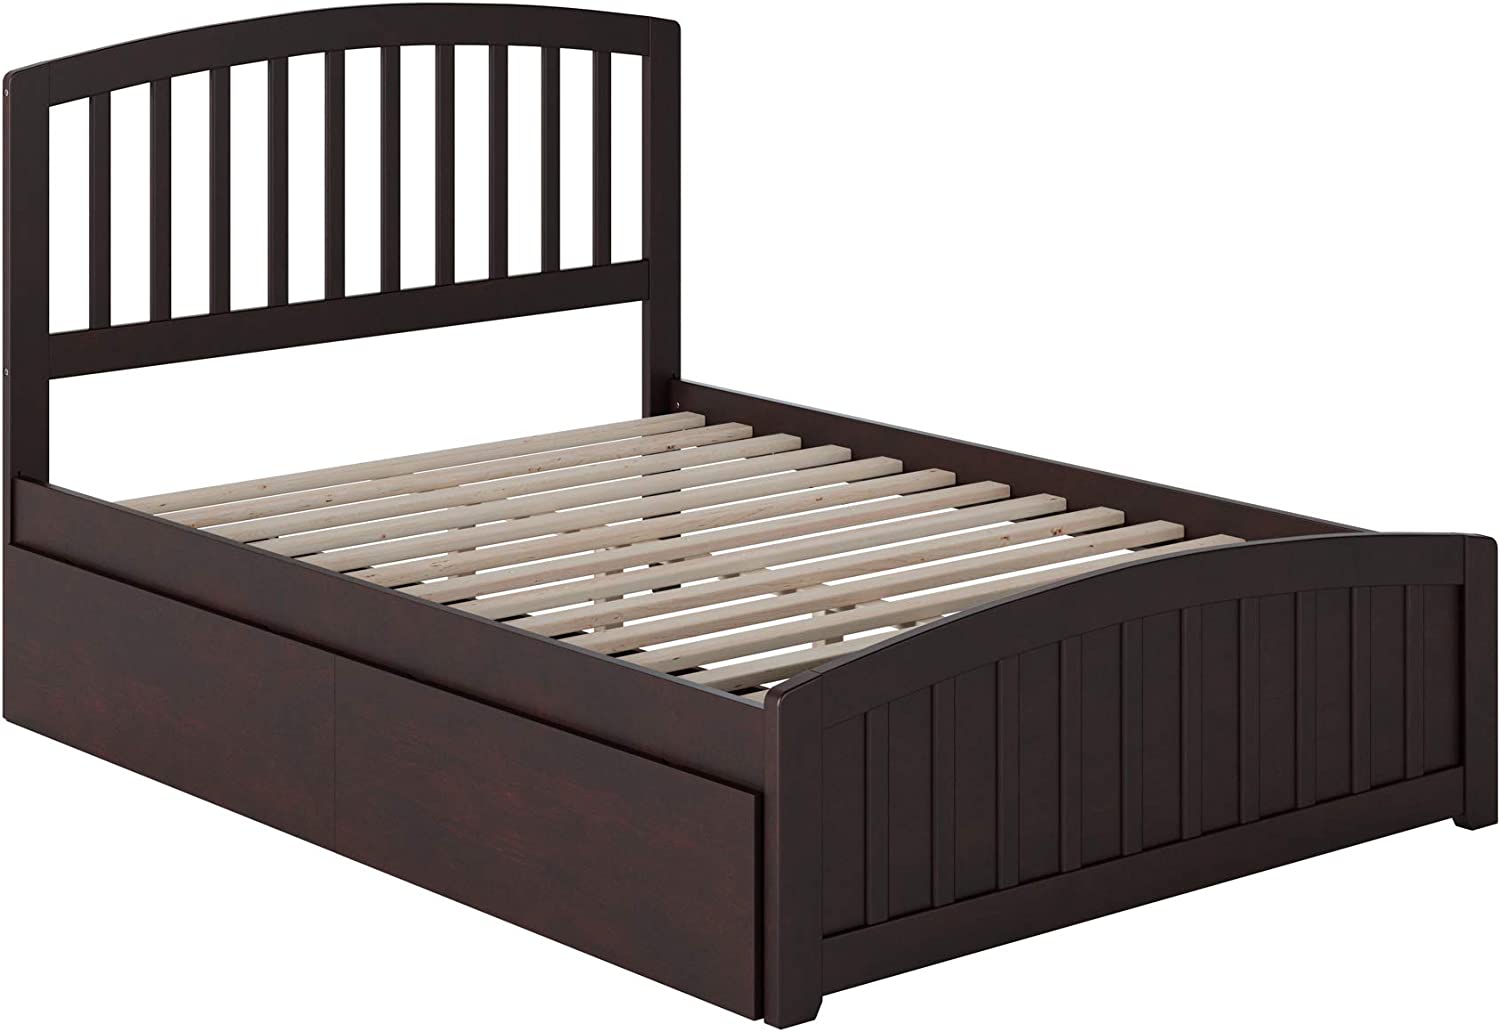 AFI Richmond Platform Matching Footboard and Turbo Charger with Urban Bed Drawers, Full, Espresso